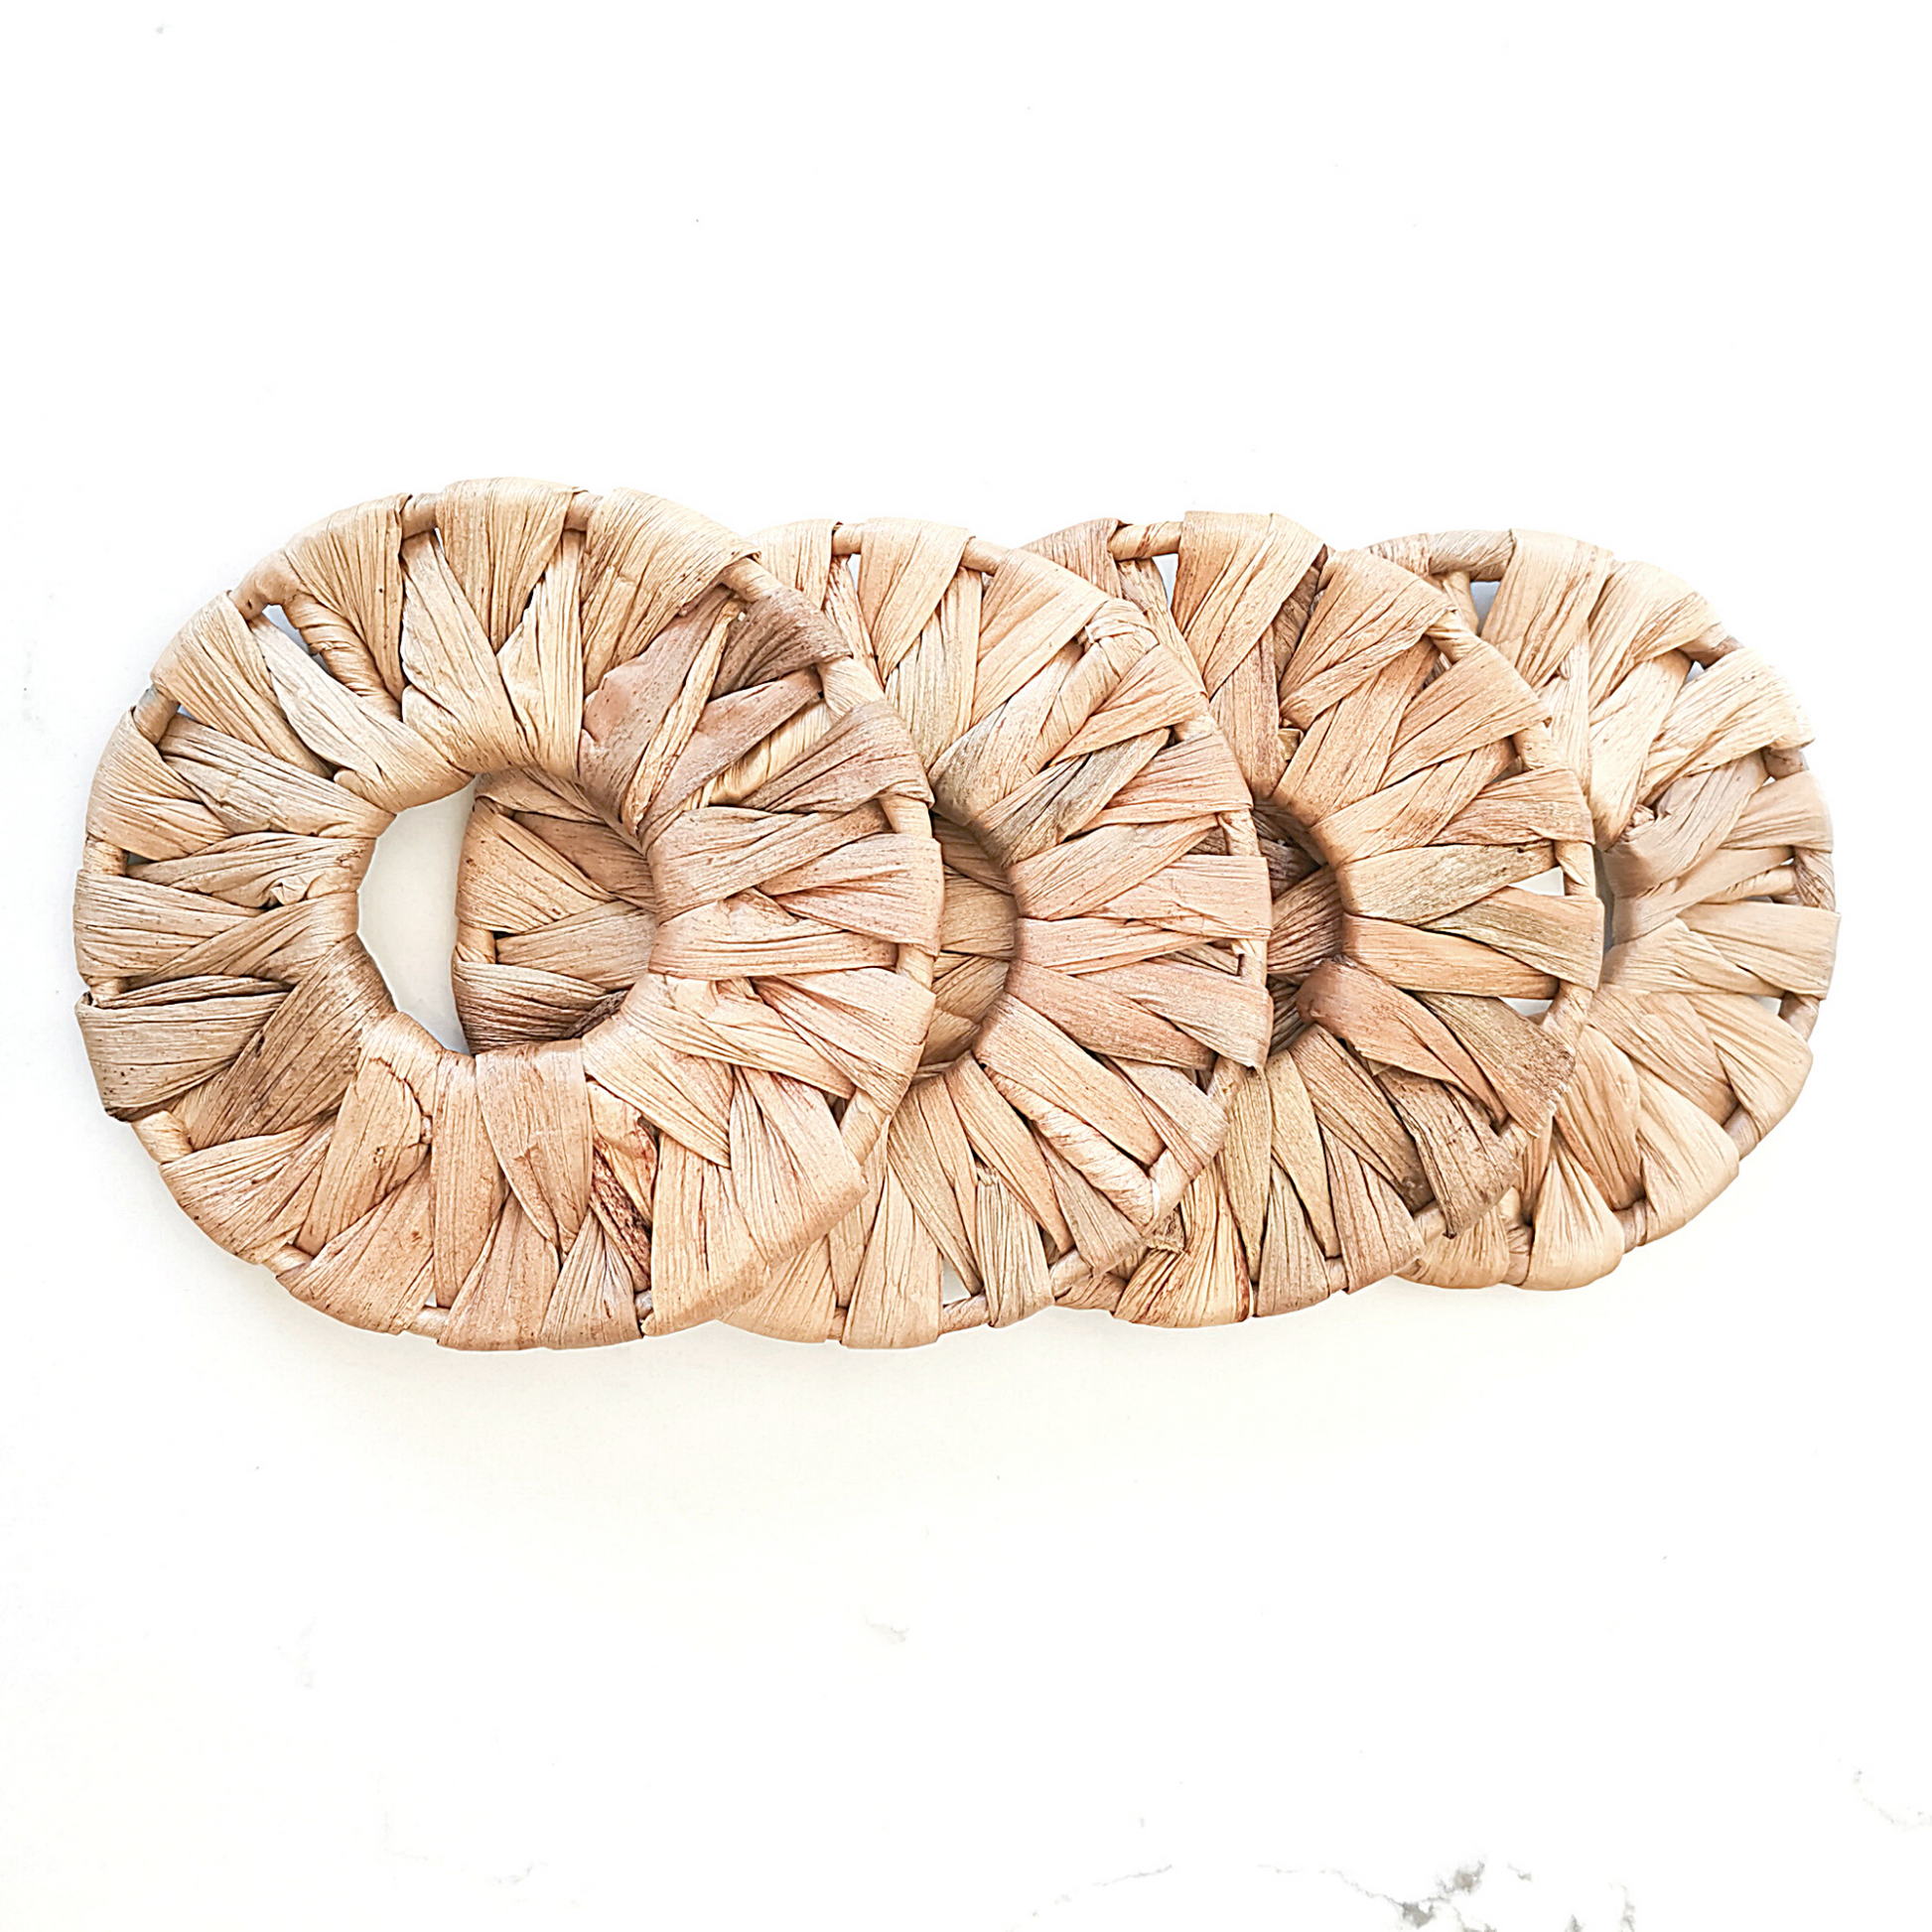 Rounded natural seagrass coasters for protecting table surfaces.